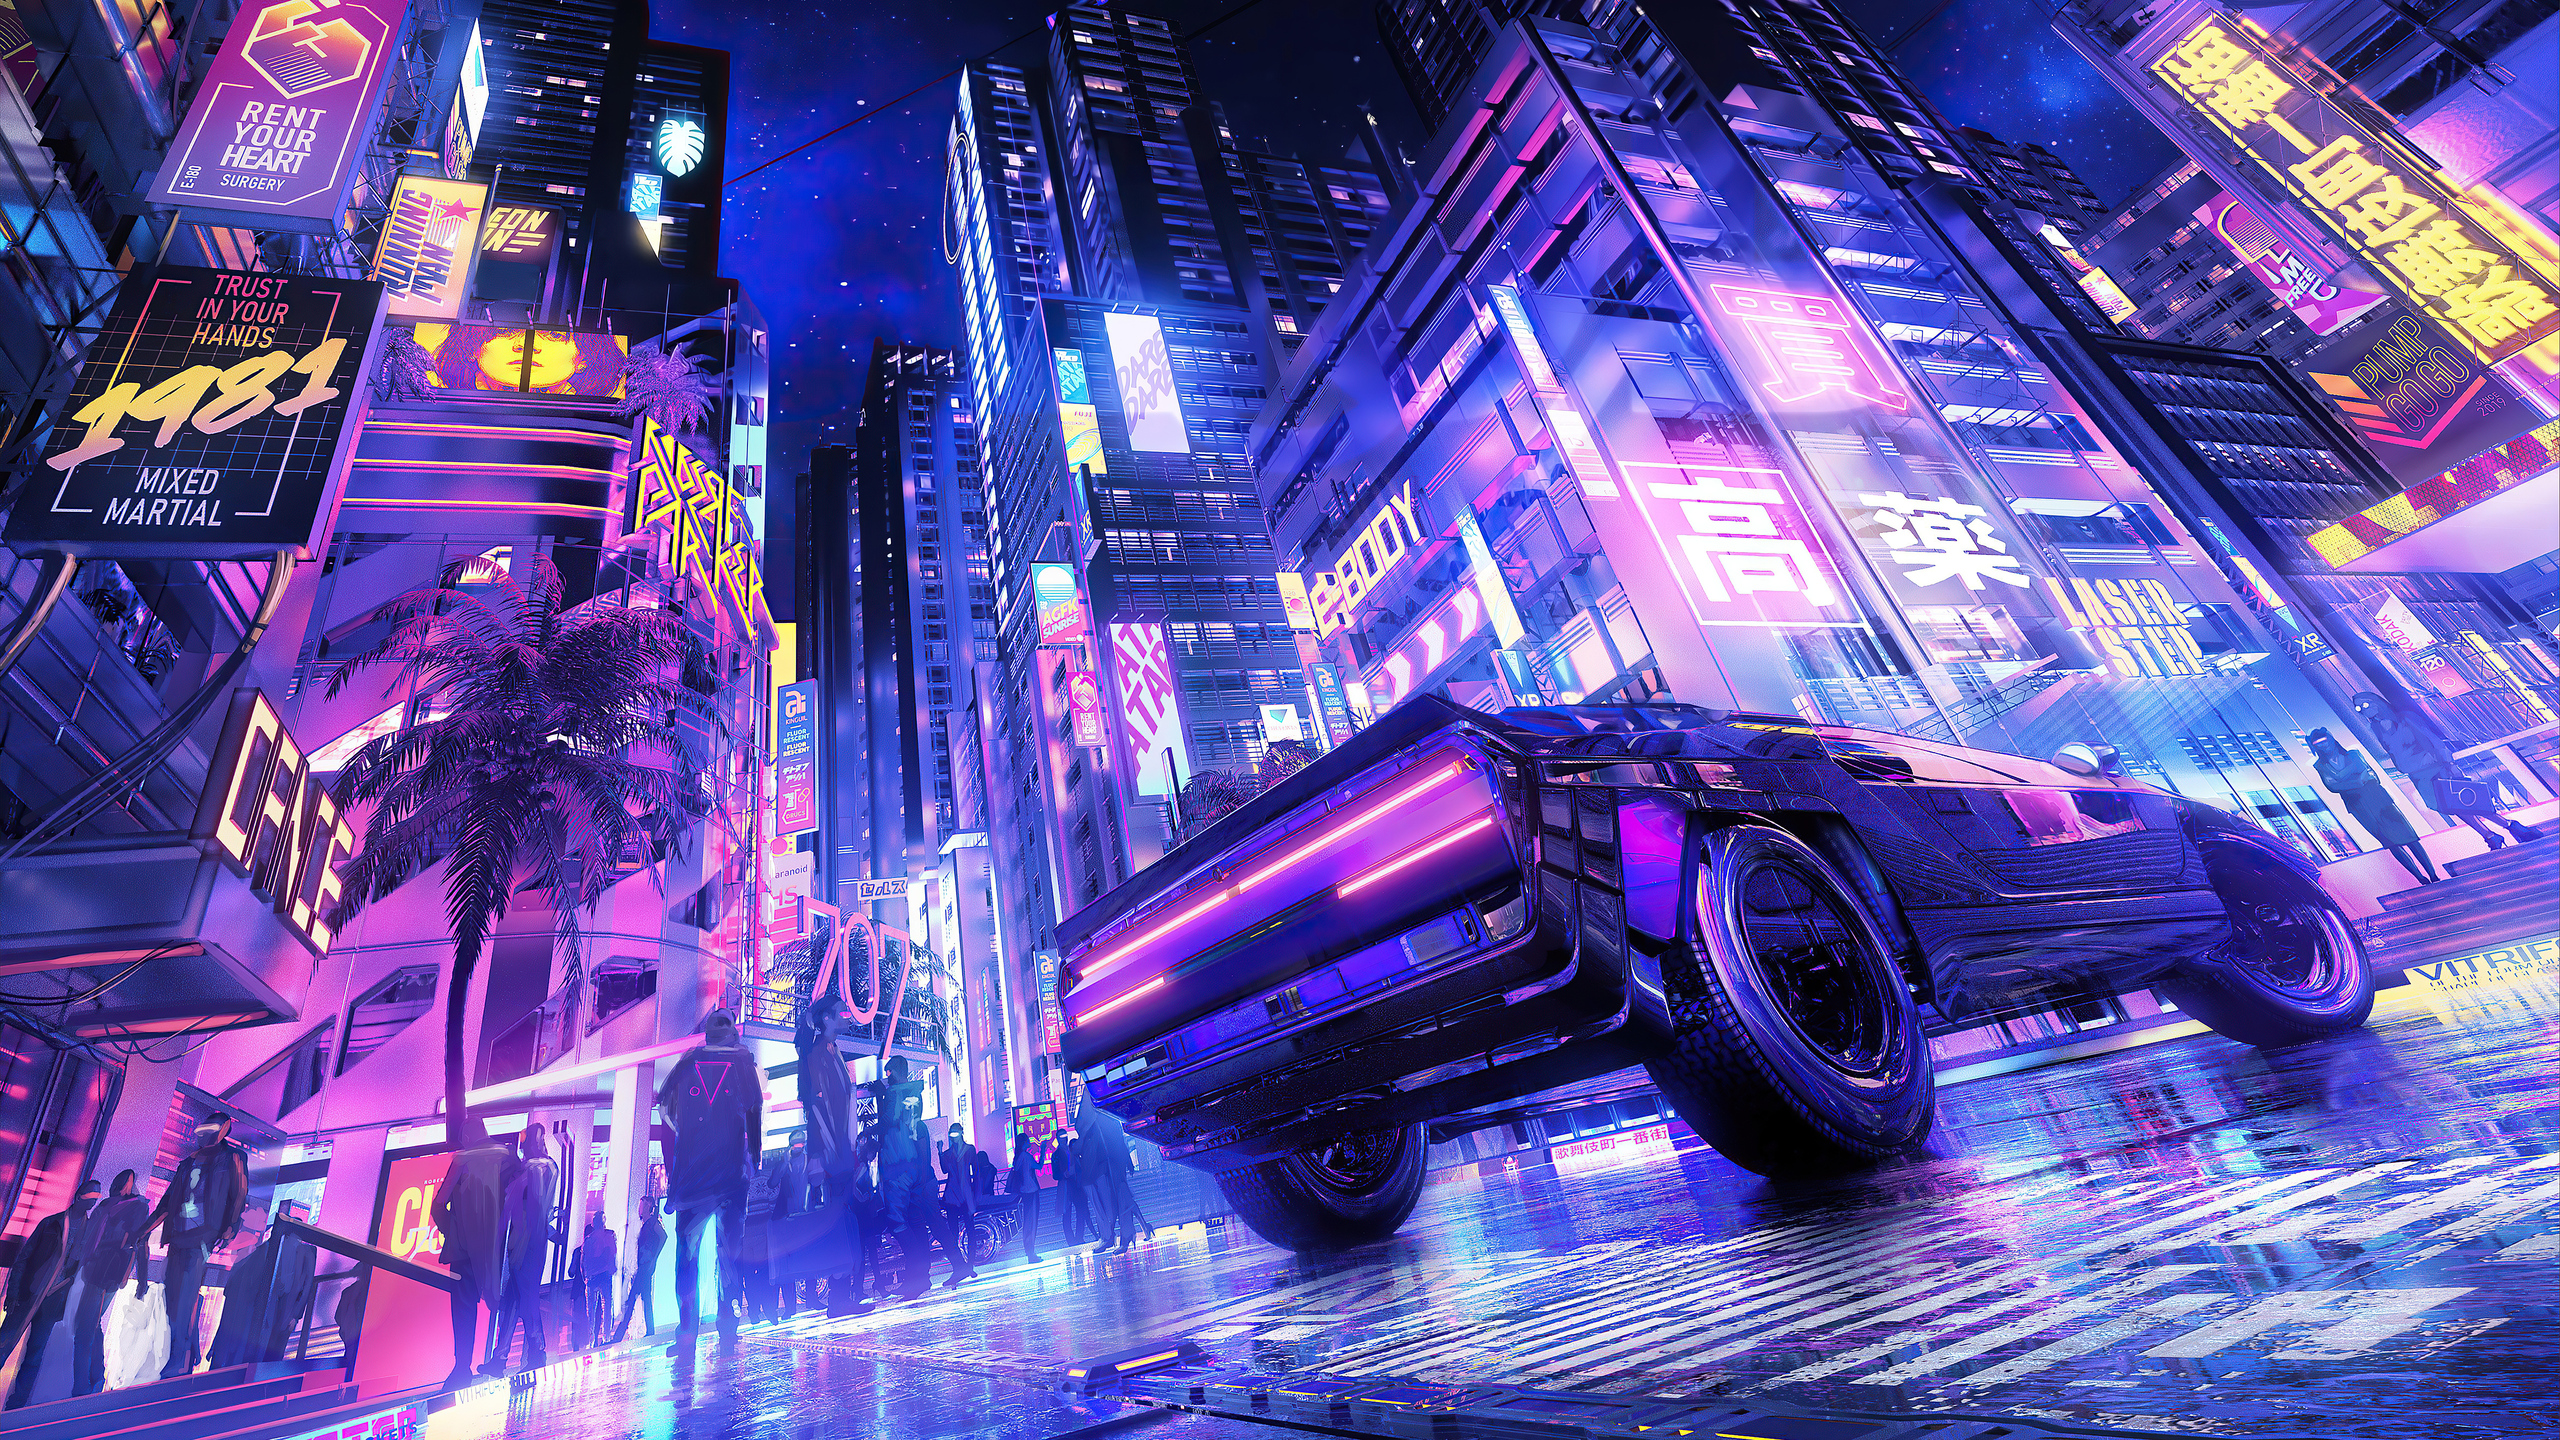 2560x1440 Club 707 Cyberpunk City 5k 1440p Resolution Hd 4k Wallpapers Images Backgrounds Photos And Pictures